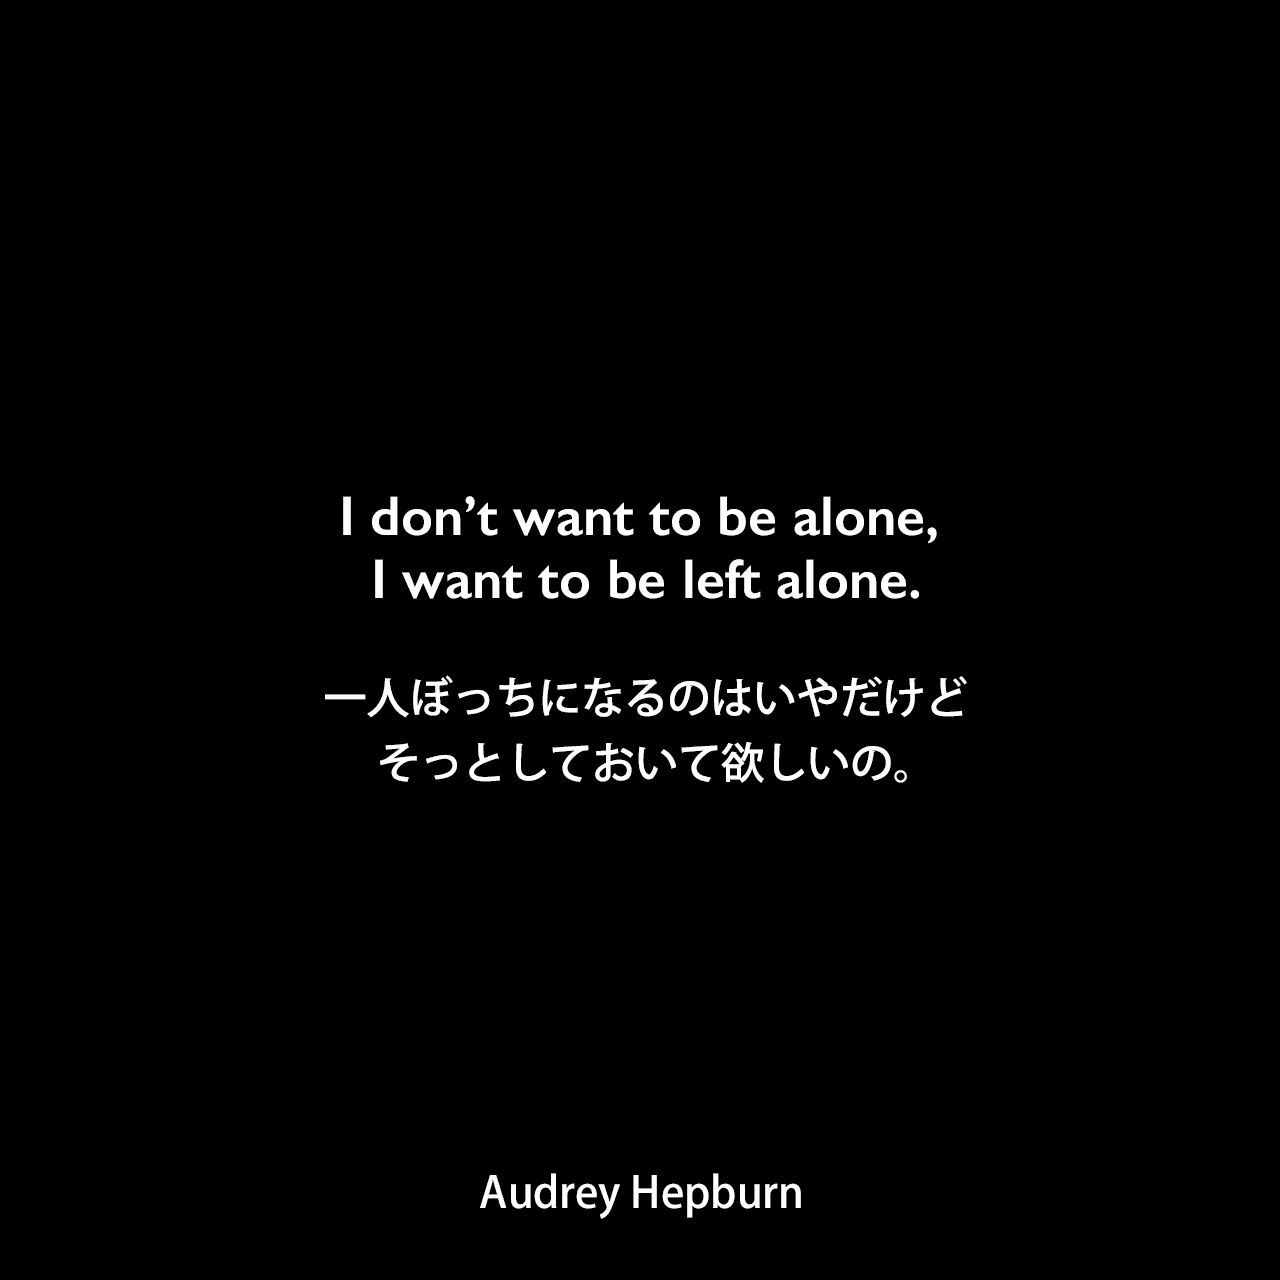 I don’t want to be alone, I want to be left alone.一人ぼっちになるのはいやだけど、そっとしておいて欲しいの。Audrey Hepburn